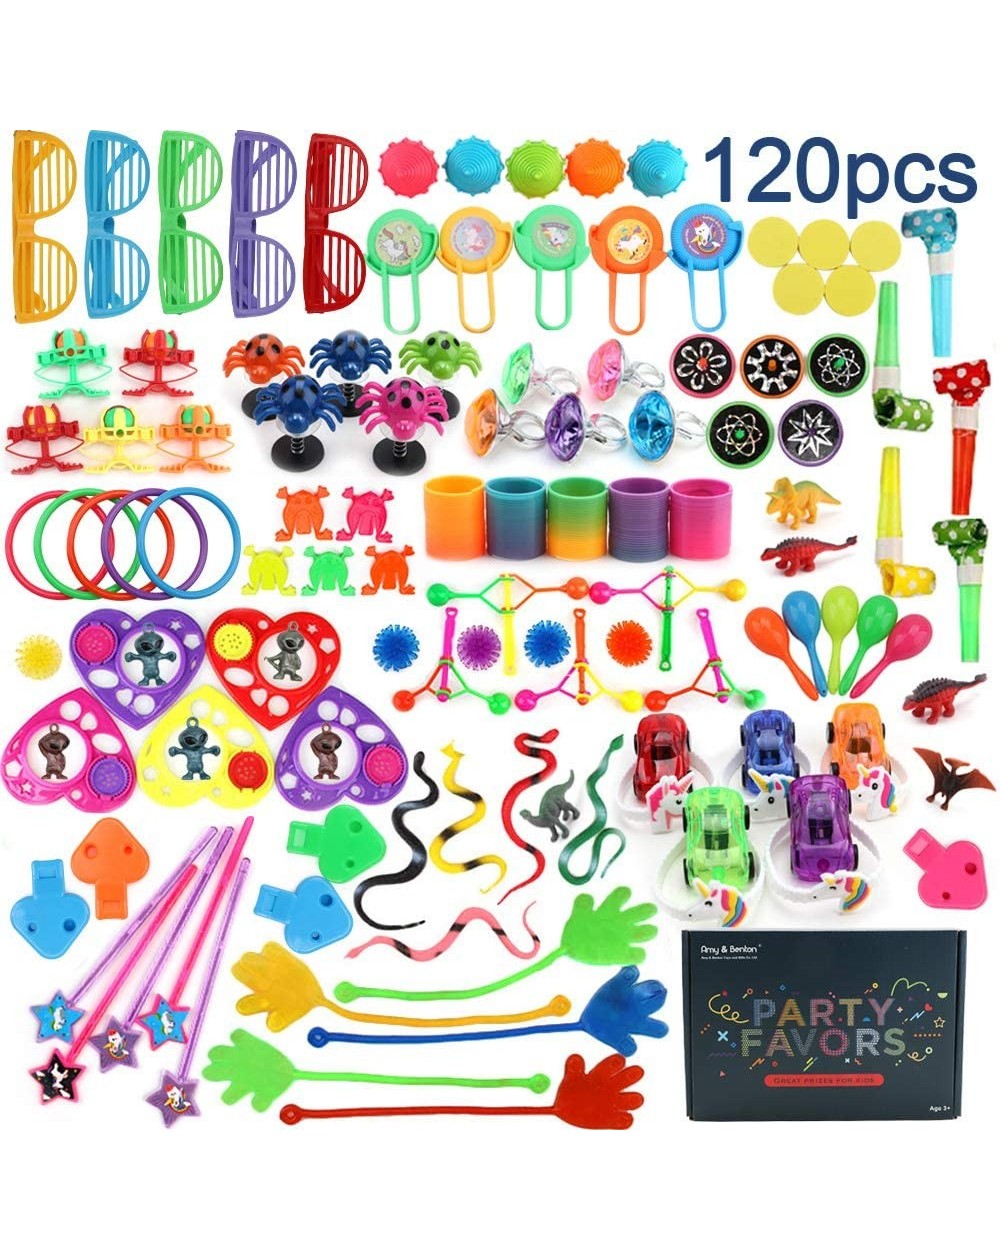 Party Favors 120PCS Classroom Treasure Box Prizes Kids Birthday Party Favors Goody Bag Fillers Kid Carnival Prizes Box Toys A...